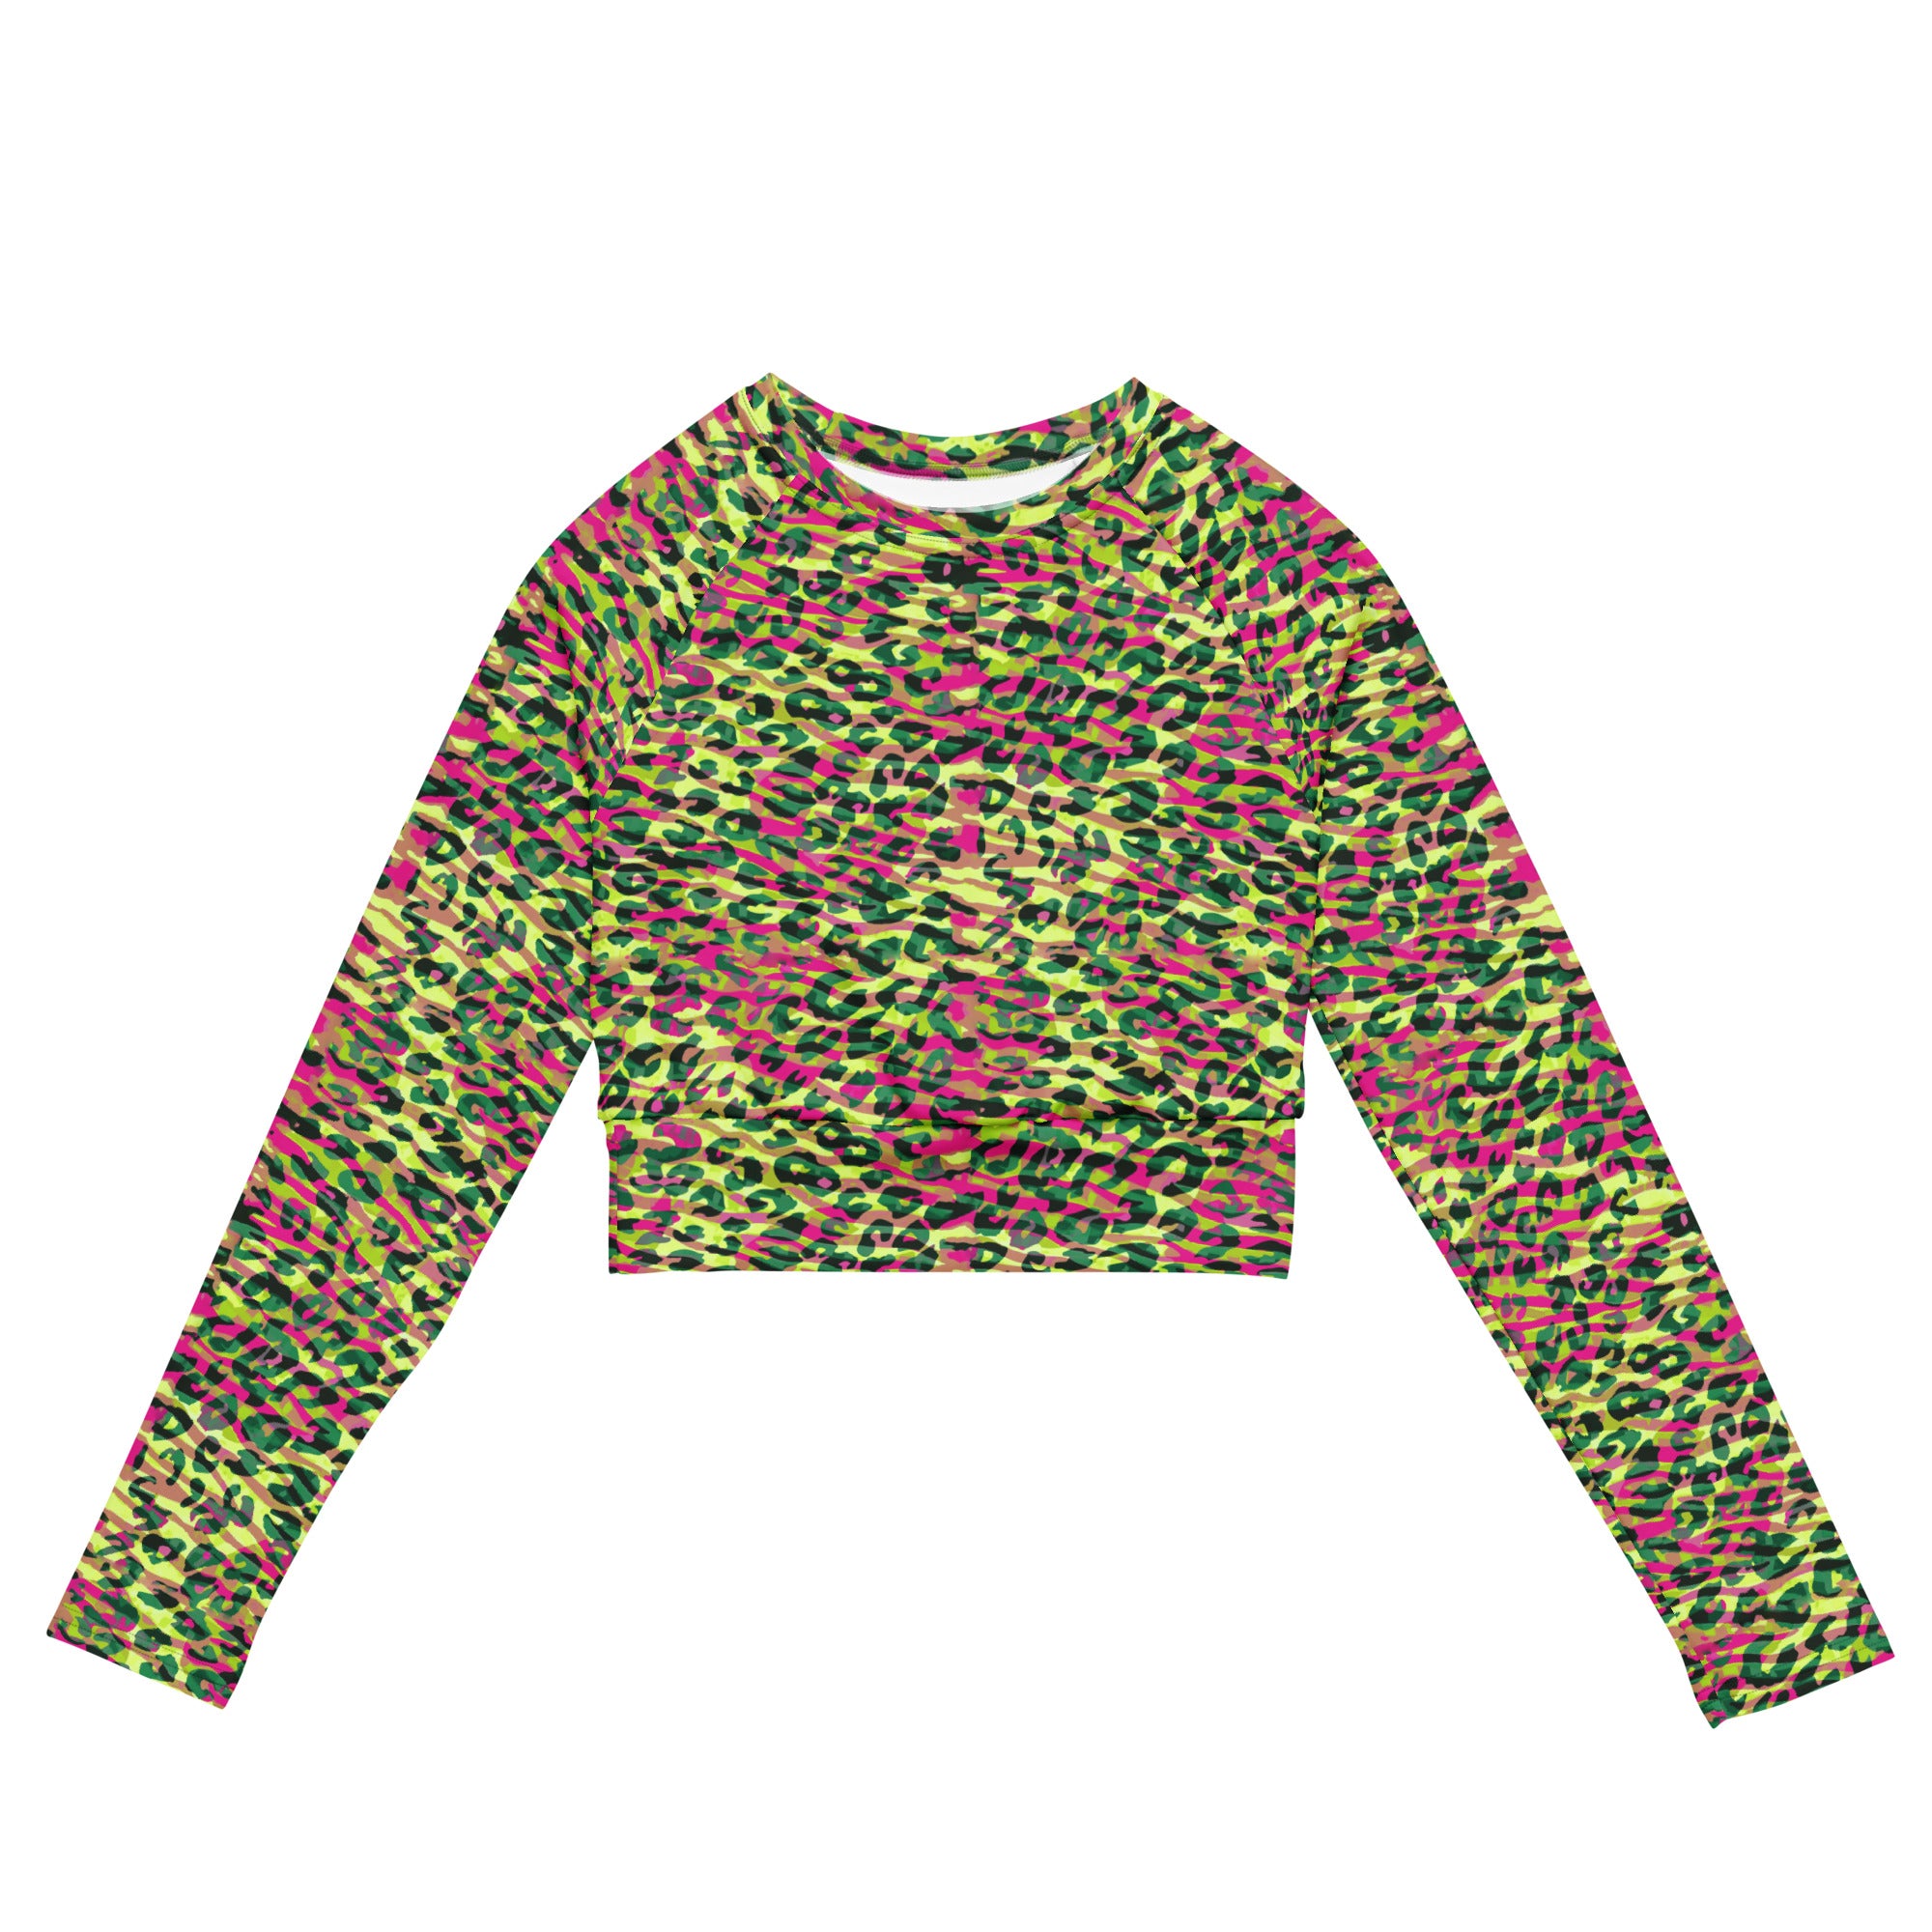 long-sleeve crop top- Zebra and Leopard print Magenta with yellow